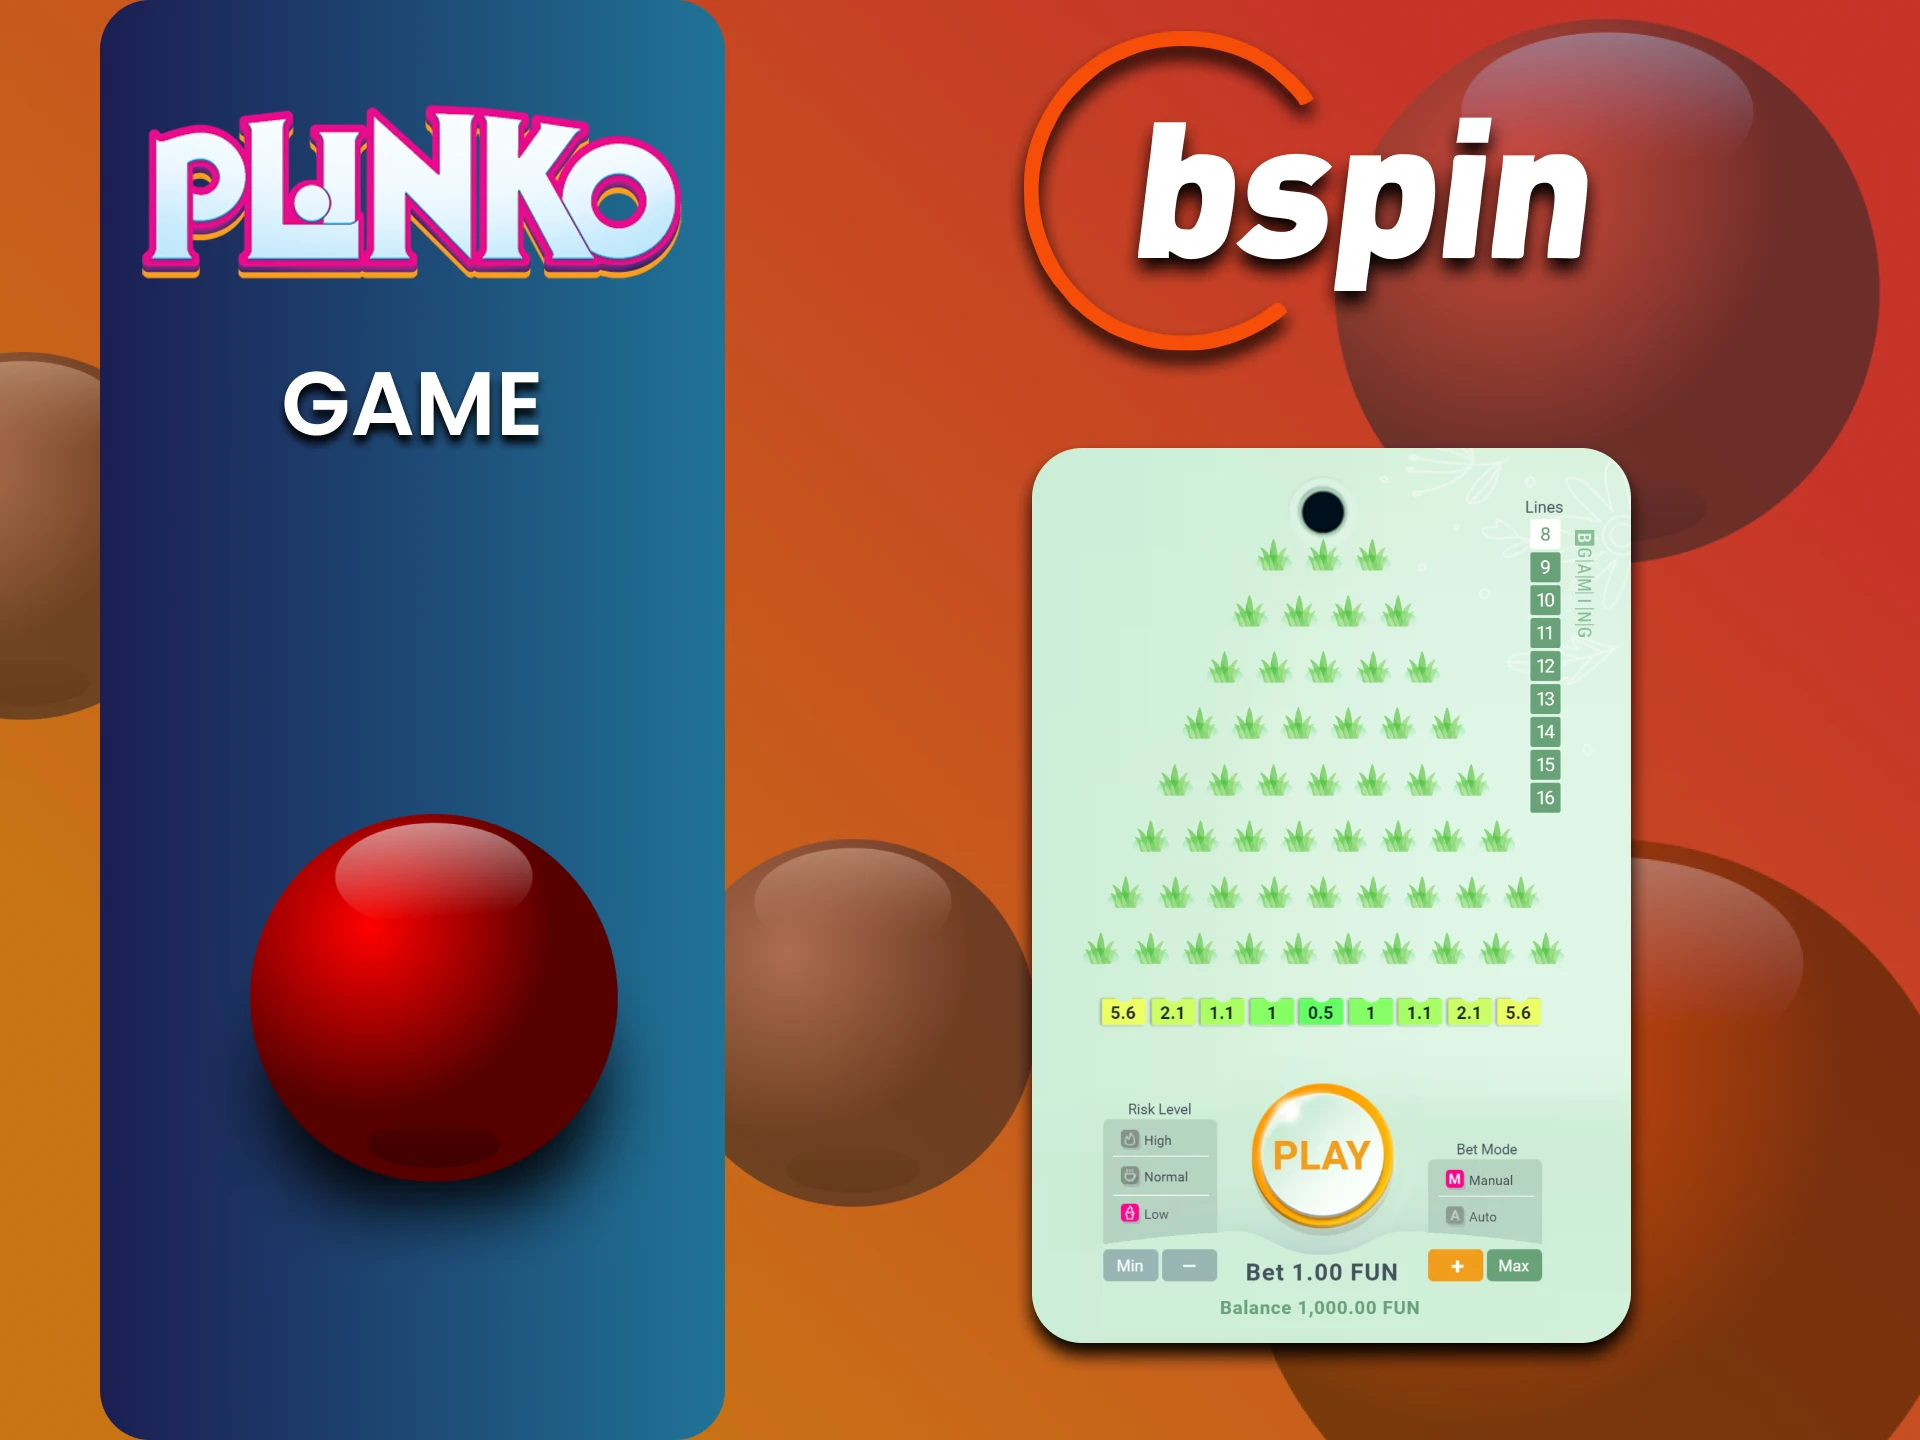 Learn about the game Plinko on the Bspin website.